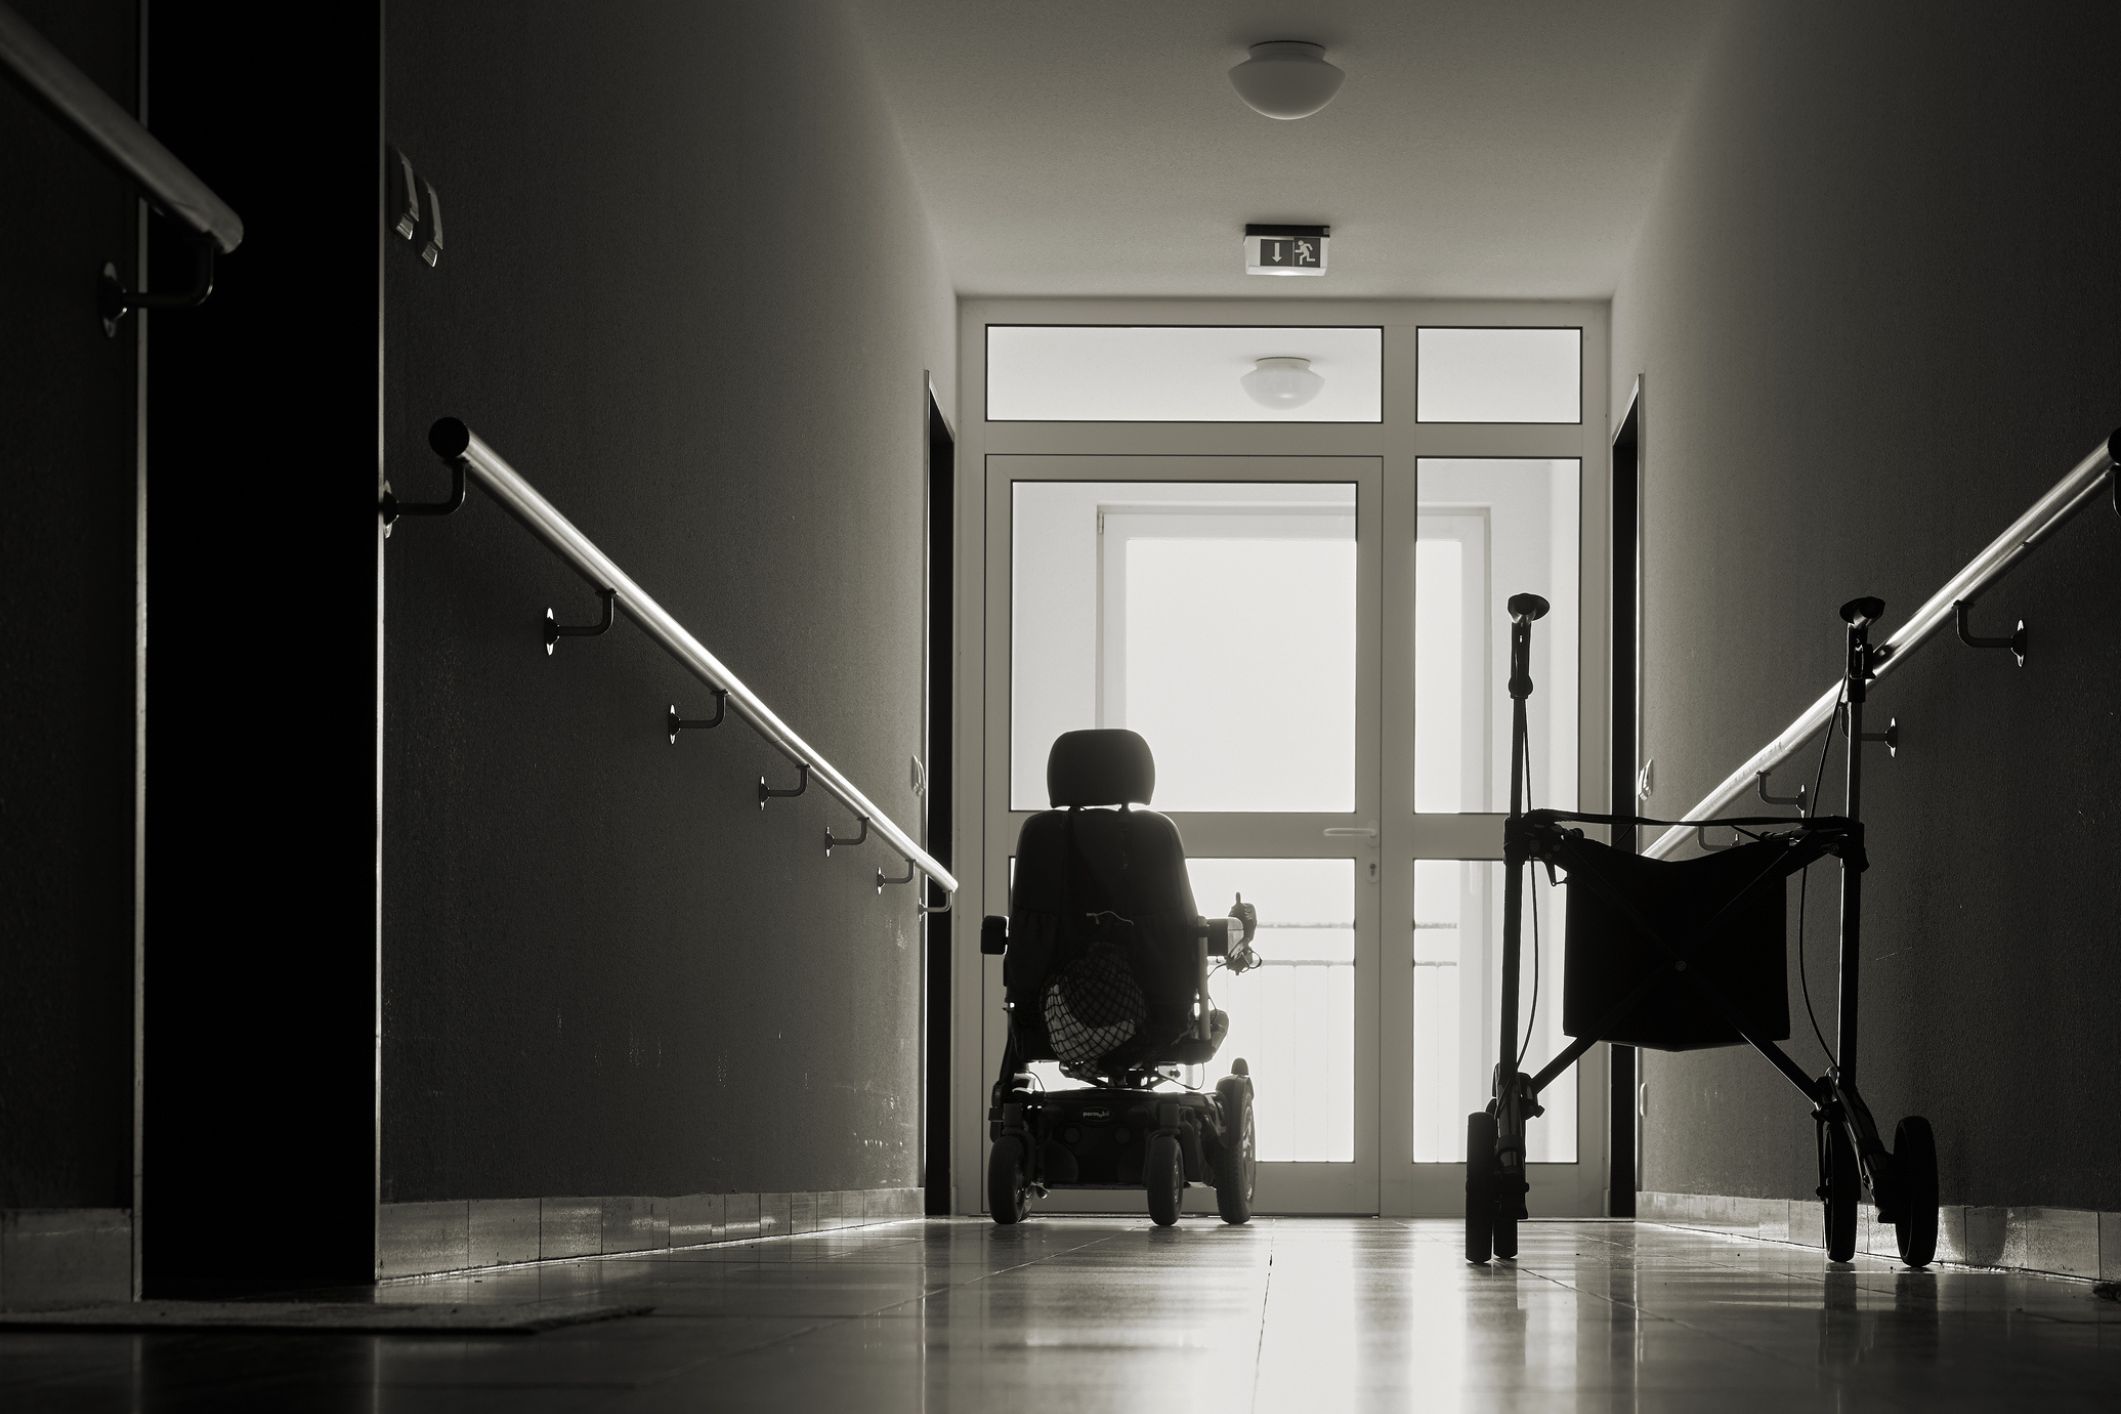 Most aged care homes are falling short of minimum care standards – new report